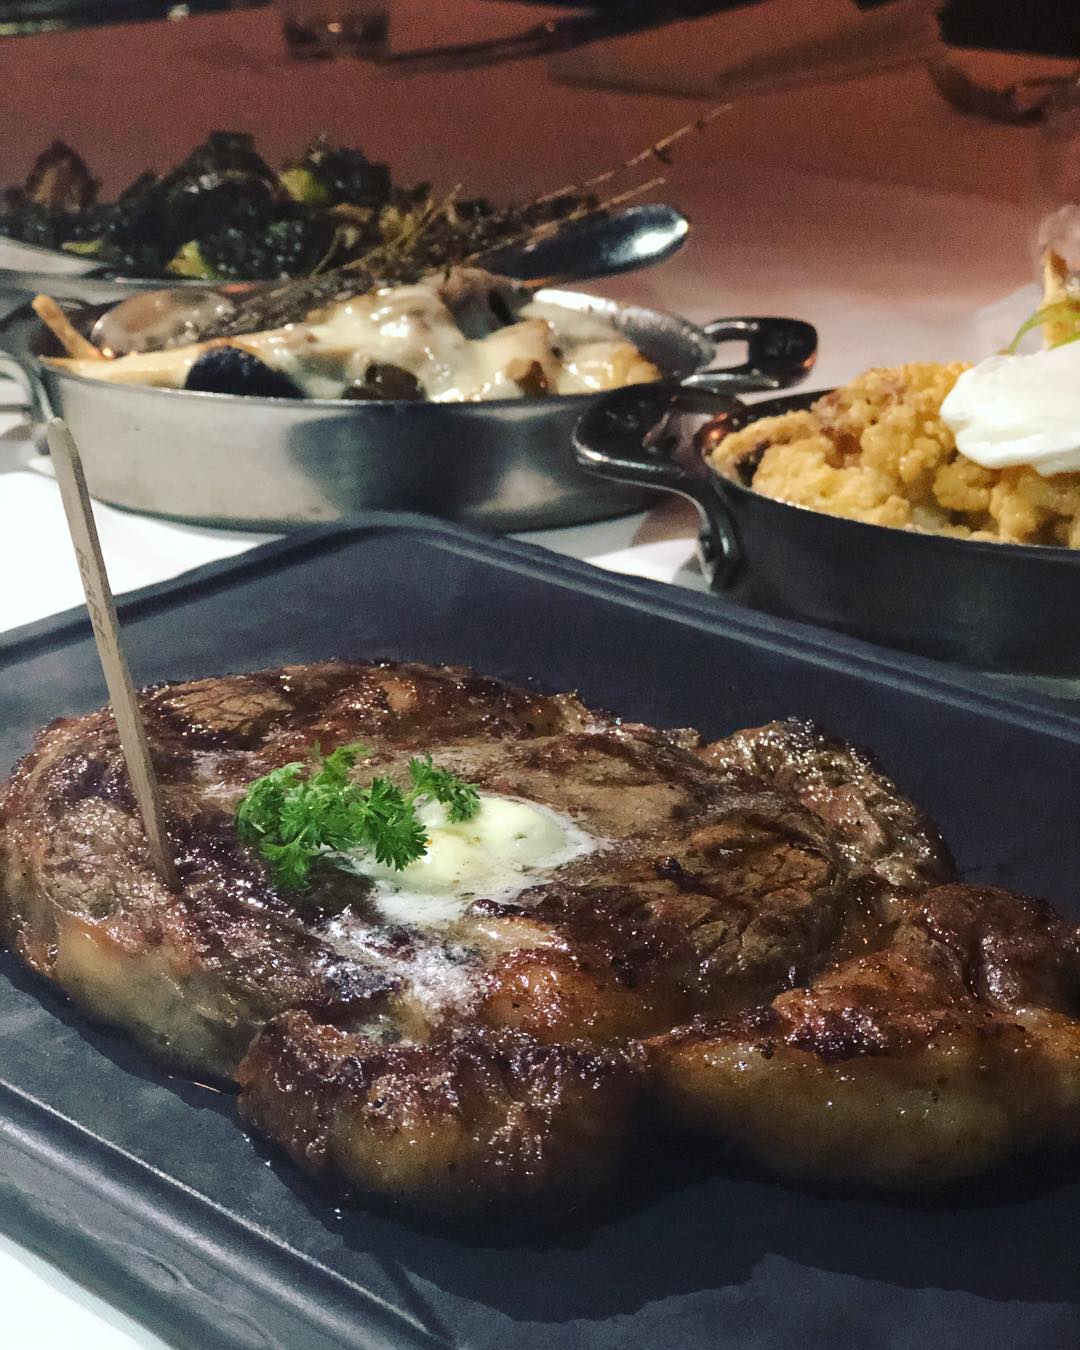 It’s not hard to eat out while traveling… for my birthday last night I had this ribeye that came with butter on top (without me asking), a cauliflower carbonara with an egg on top and tons of bacon, mushrooms smothered in cheese, and delicious Brussels sprouts!! All ordered straight off the menu with no changes made! Thank you for the fully keto meal Black+Blue in Vancouver